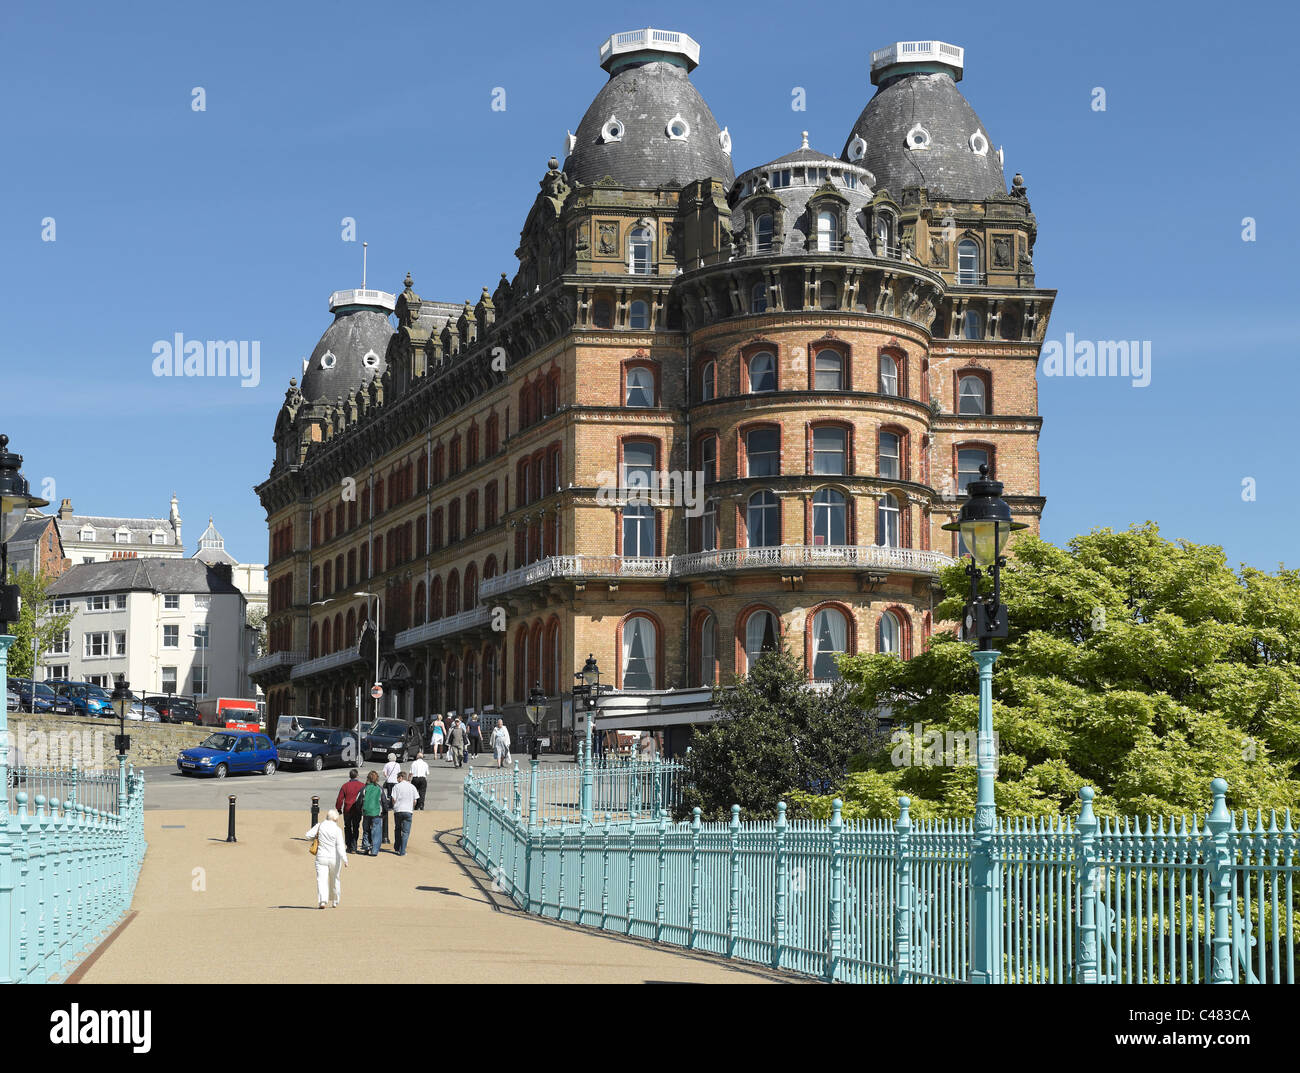 The Grand Hotel from Spa Bridge in summer South Bay Scarborough North Yorkshire England UK United Kingdom GB Great Britain Stock Photo